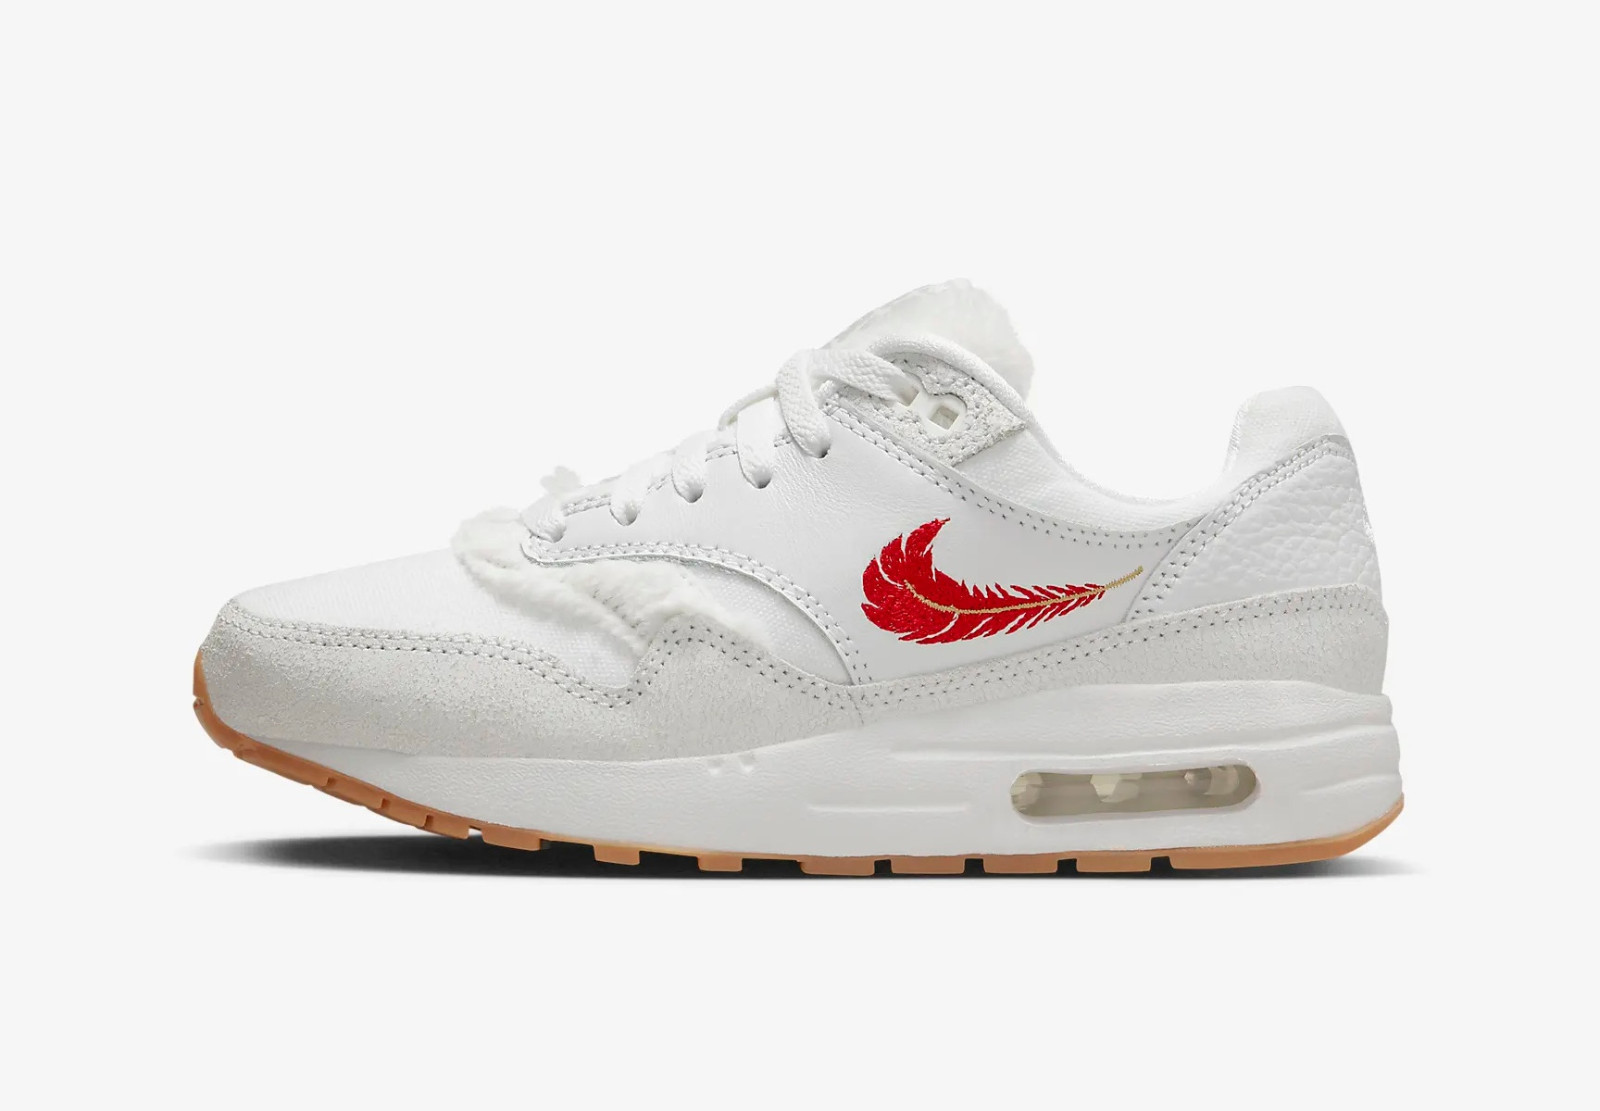 verklaren Ontdooien, ontdooien, vorst ontdooien Auckland where are real nike shoes made in the world series - Nike kids Air Max 1  The Bay GS White University Red FJ4628 - GmarShops - 100